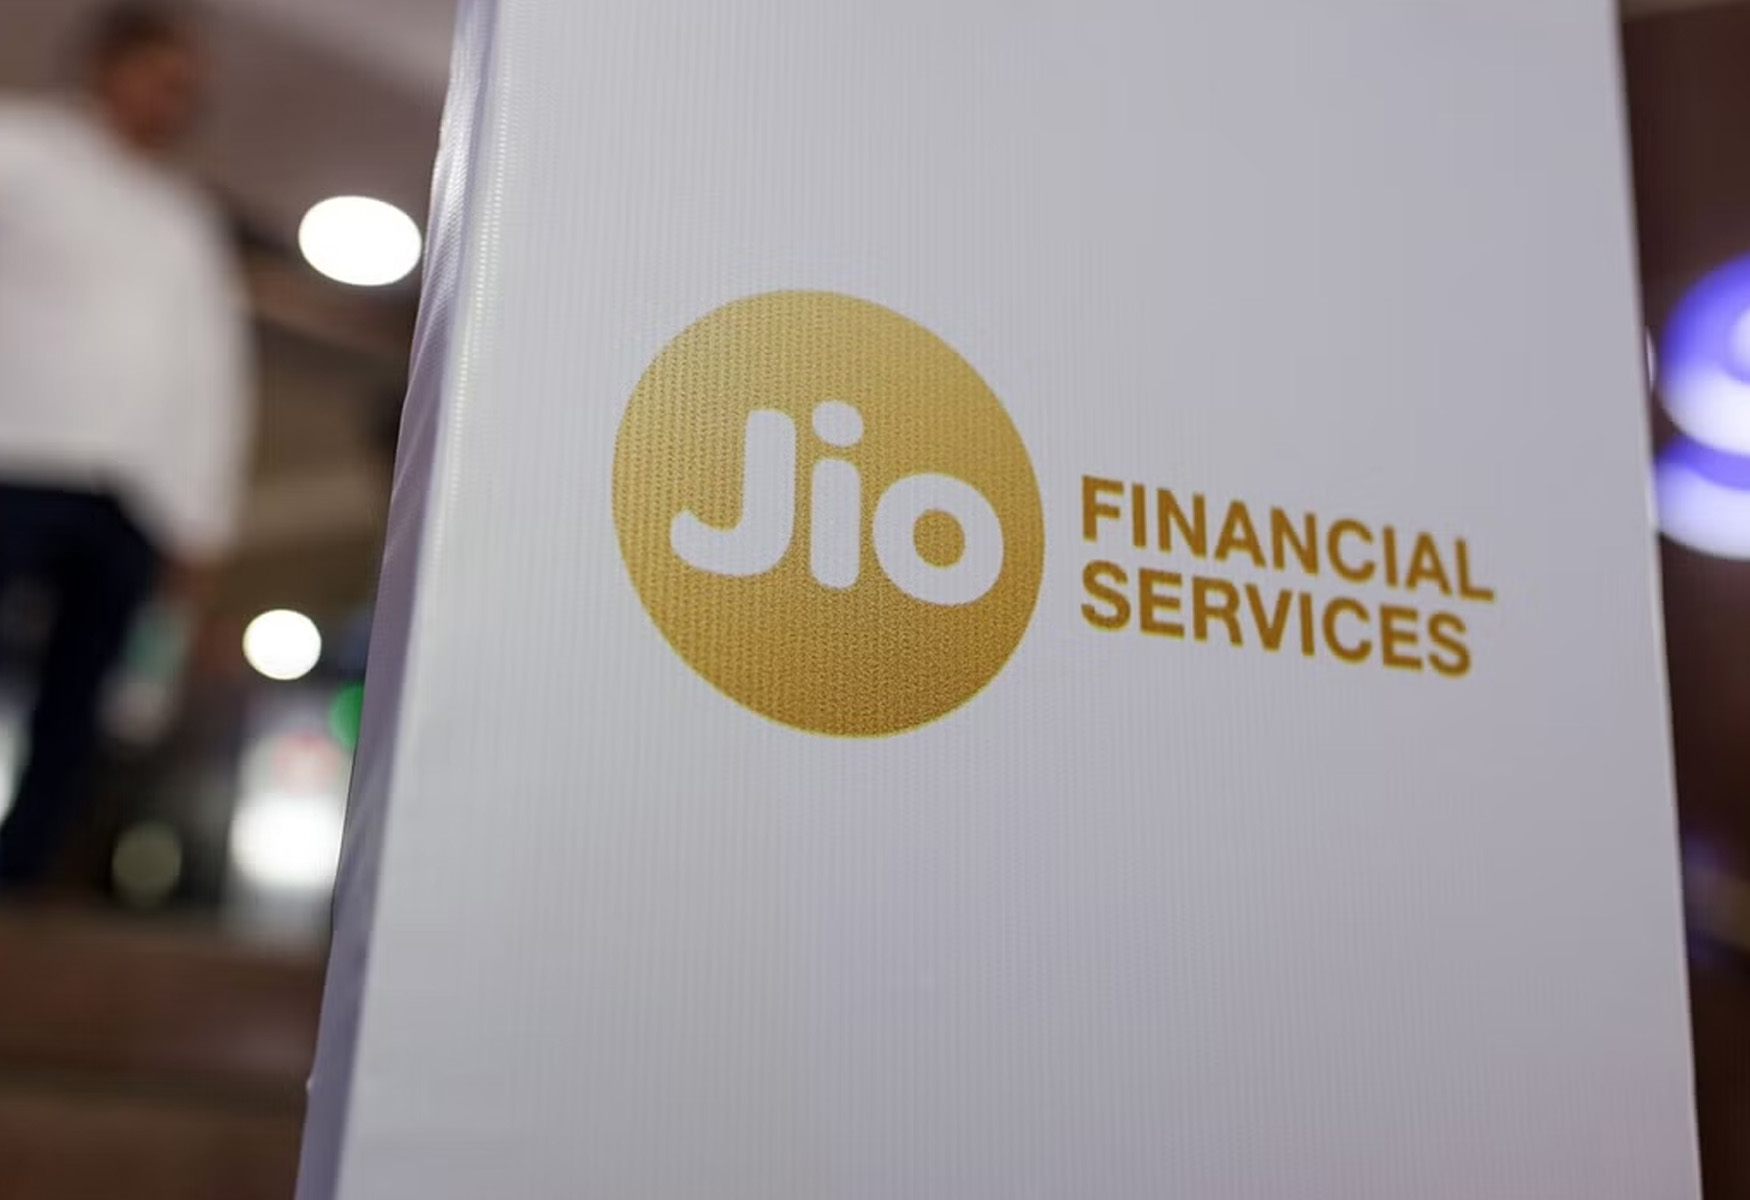 Ambani’s Jio Financial Launches Lending And Insurance Businesses